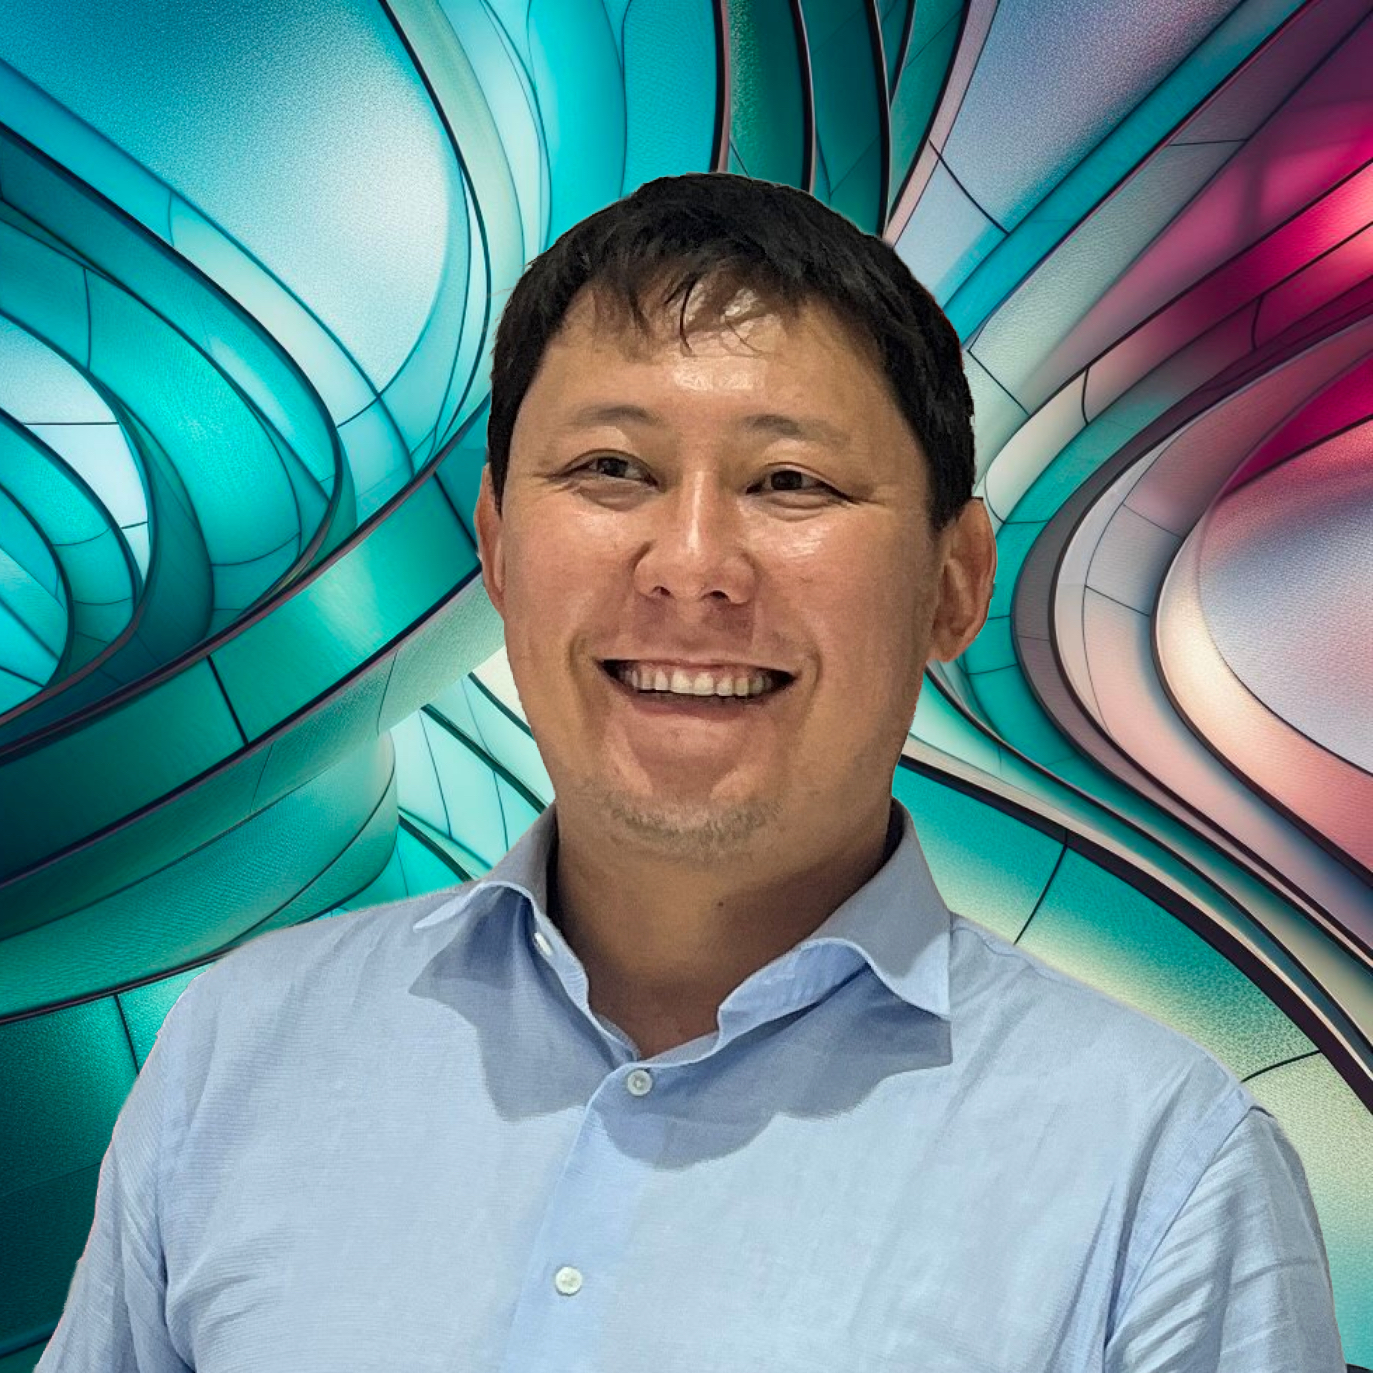 A man smiling in front of a colorful abstract background.